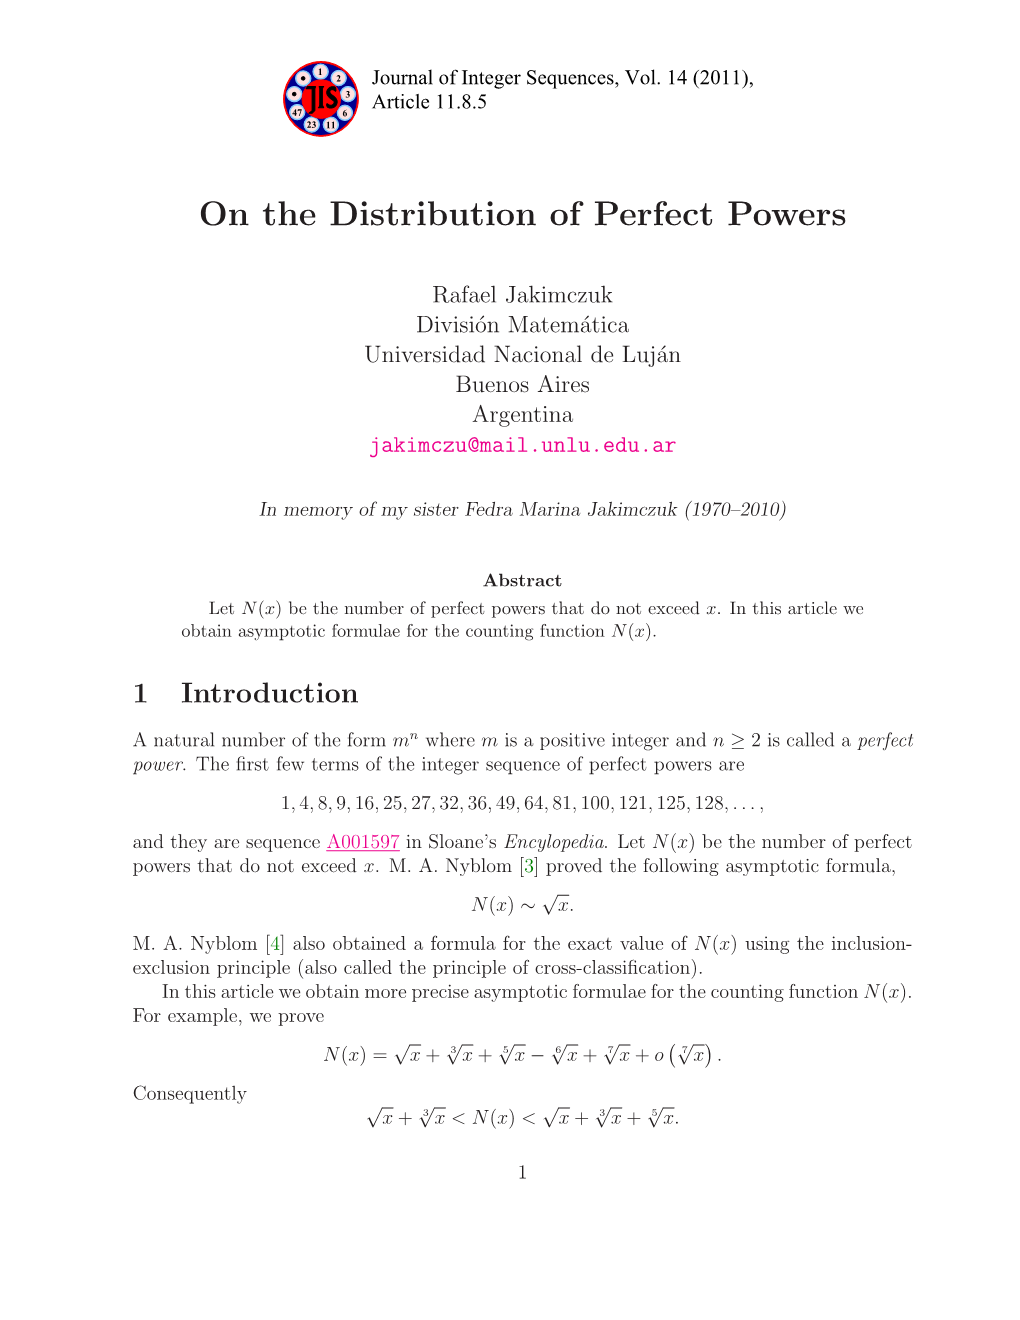 On the Distribution of Perfect Powers